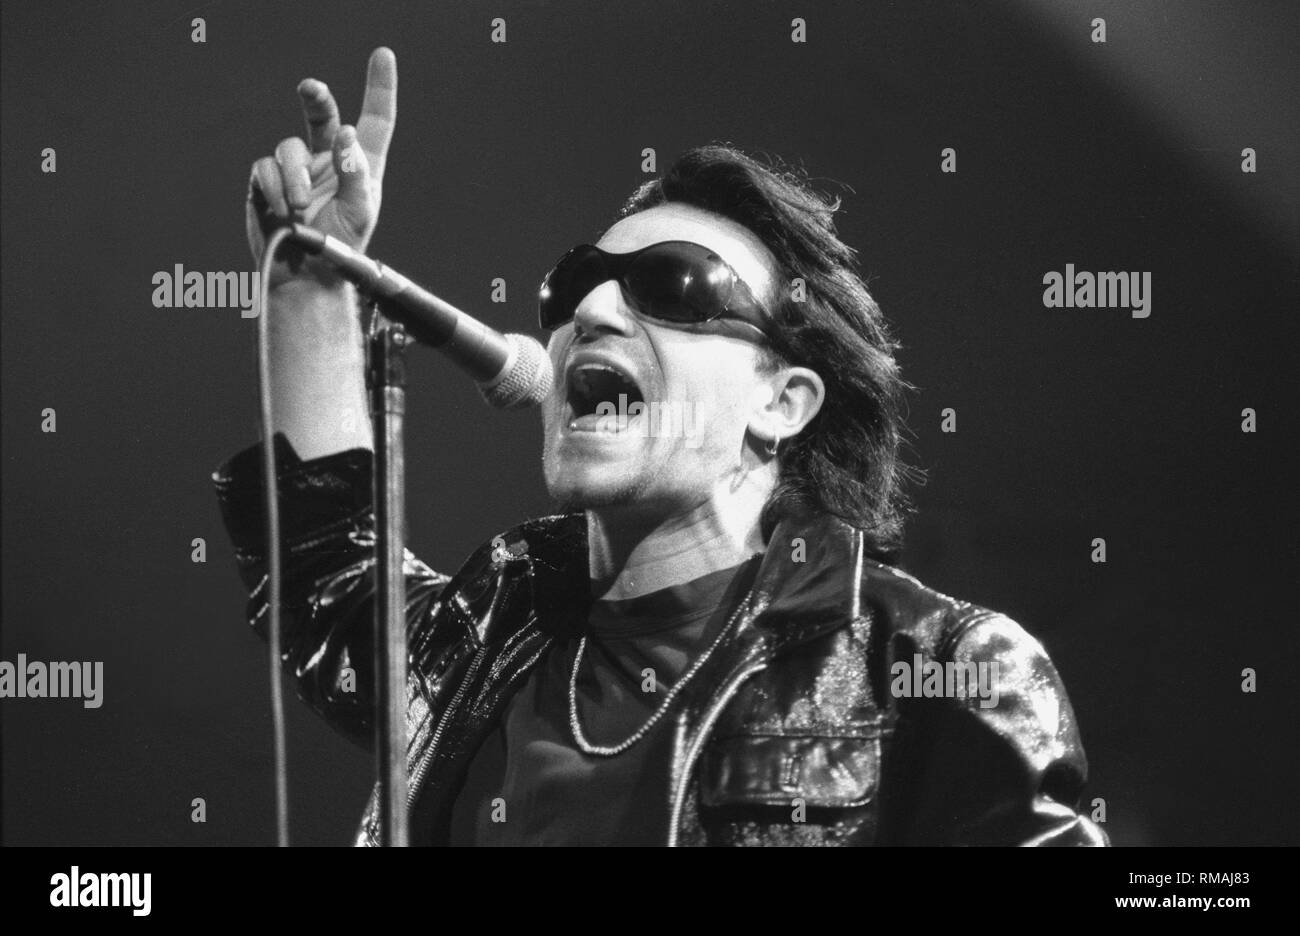 Singer Paul Hewson also, best known by his stage name Bono, of the Irish rock band U2, is shown performing on stage during a 'live' concert appearance. Stock Photo